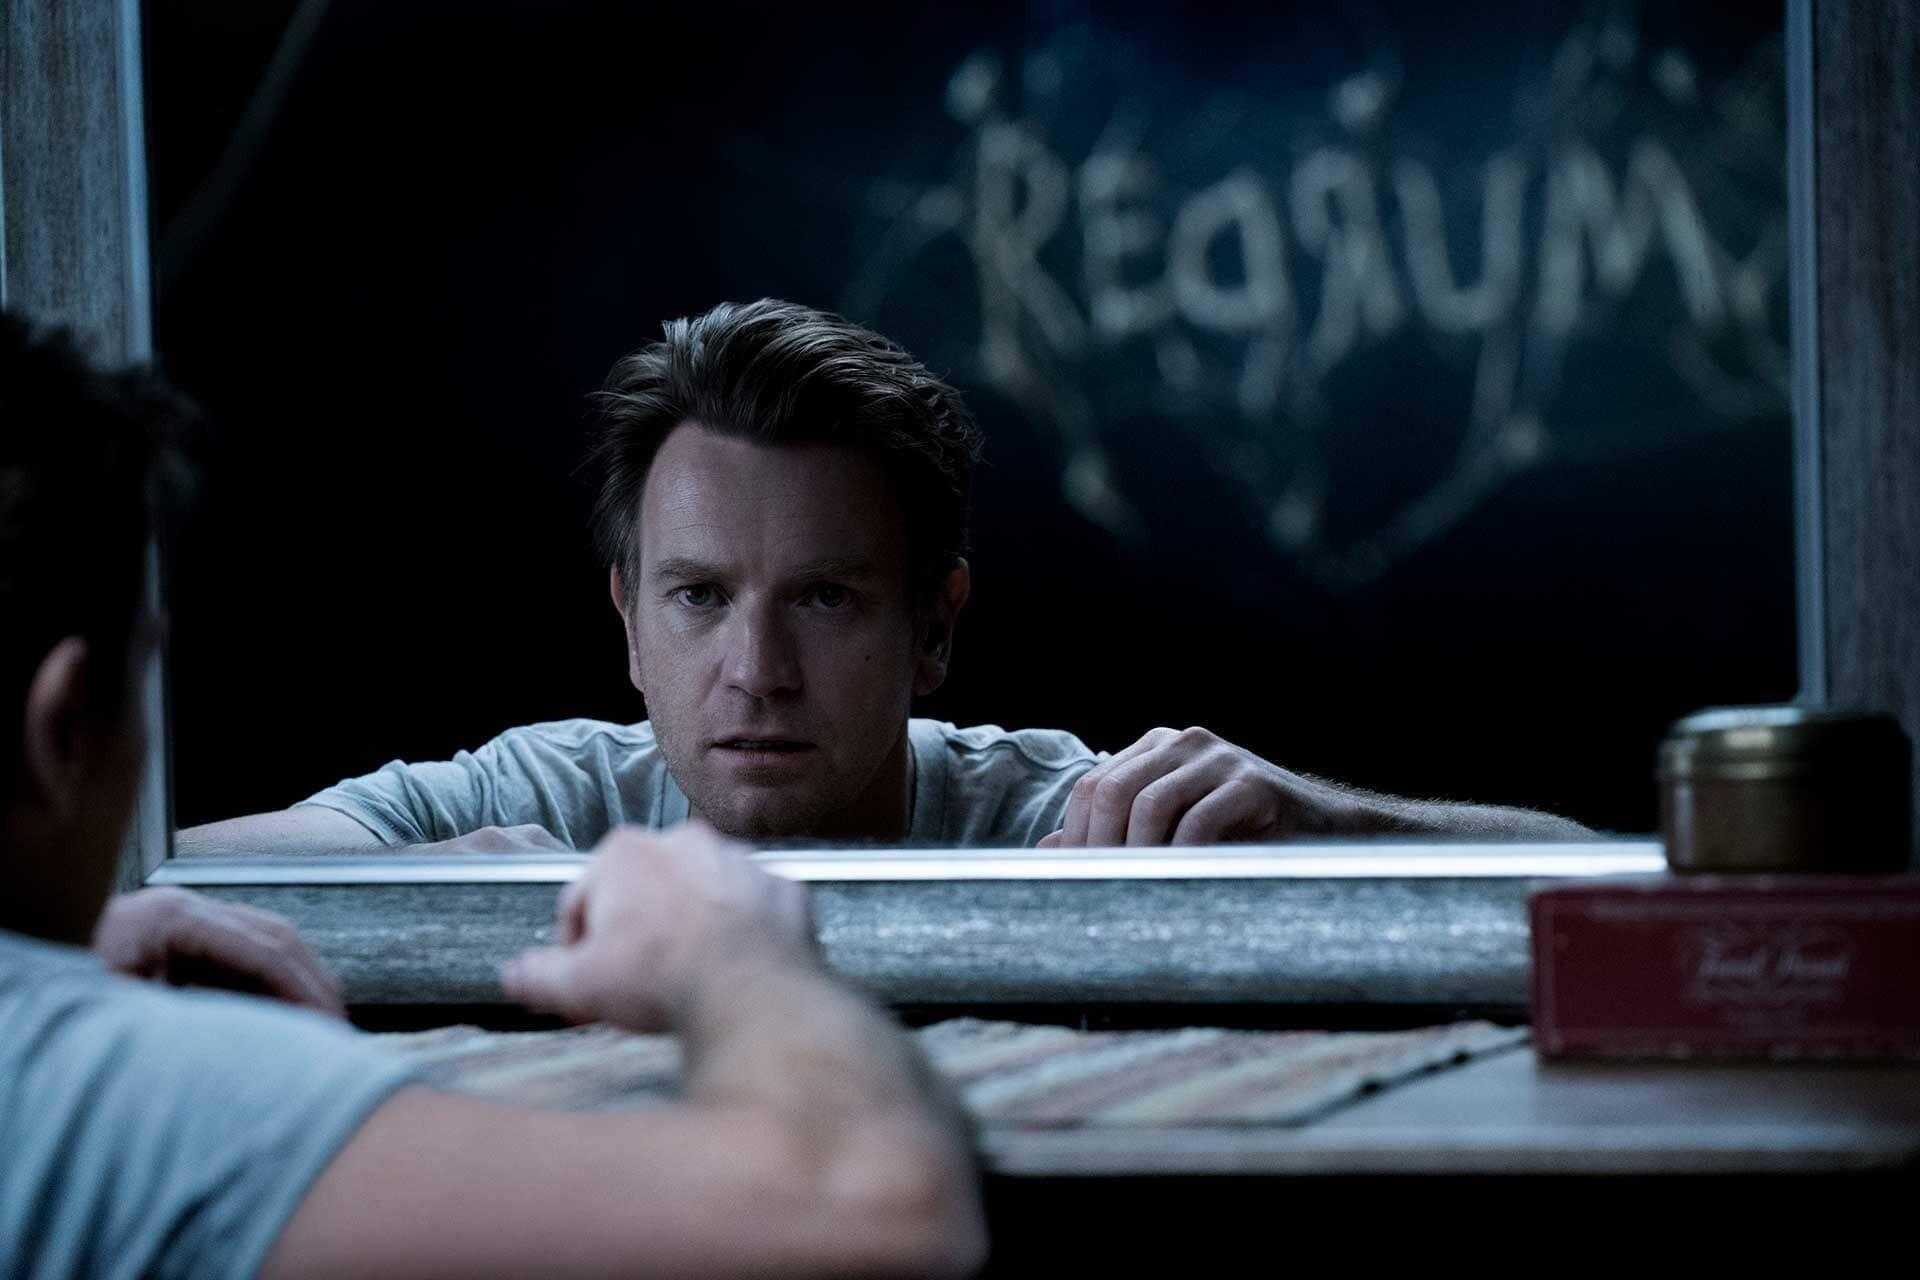 Ewan McGregor stars as the grown Dan Torrance in "Doctor Sleep" (2019), the anticipated sequel to "The Shining."